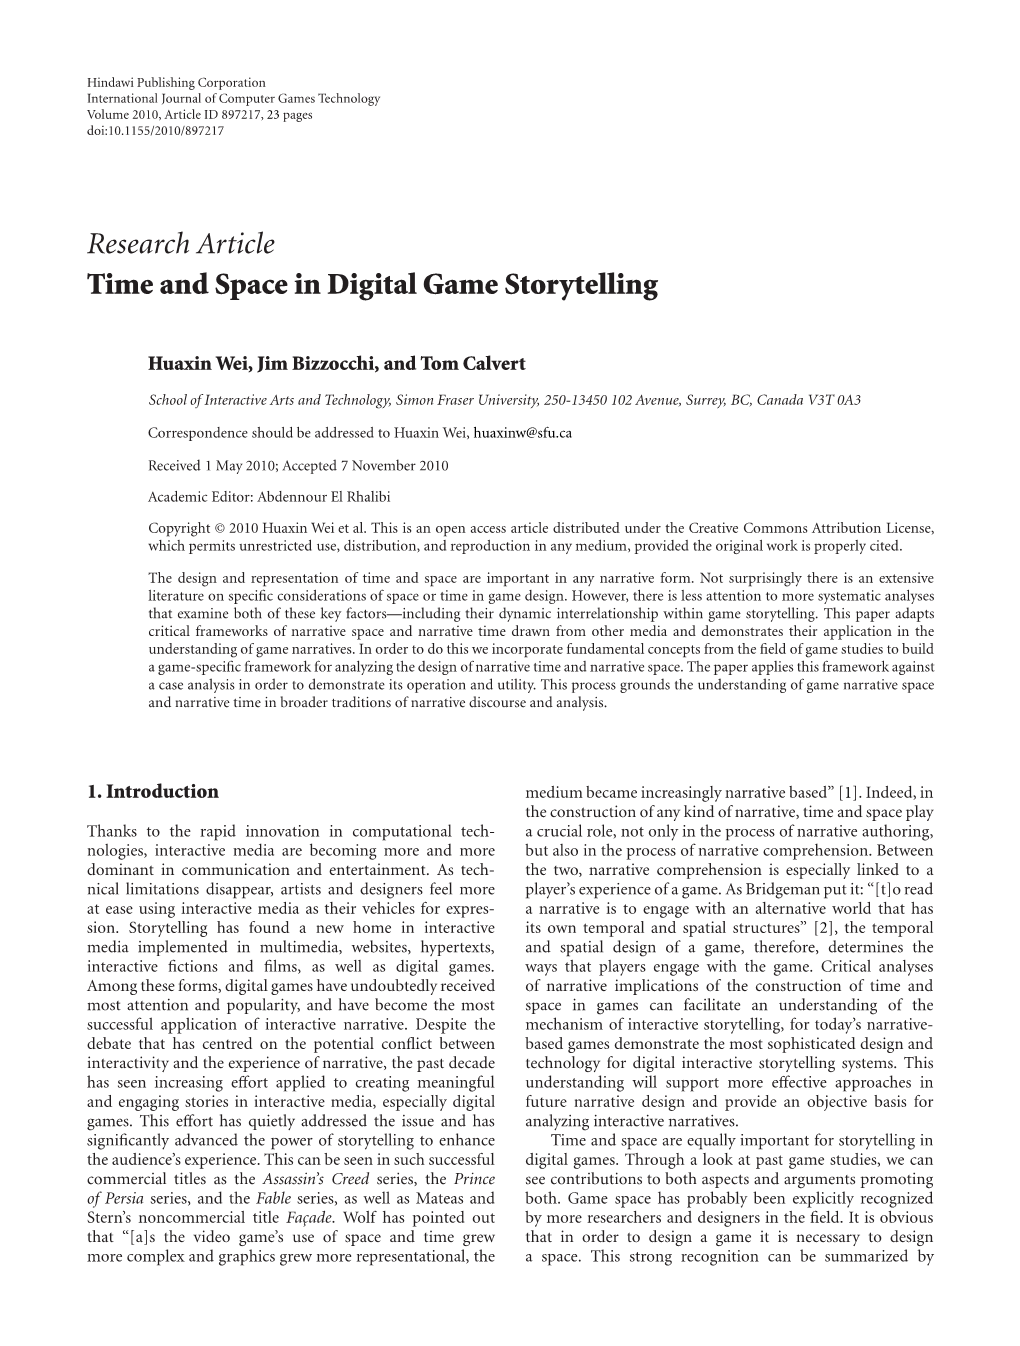 Research Article Time and Space in Digital Game Storytelling